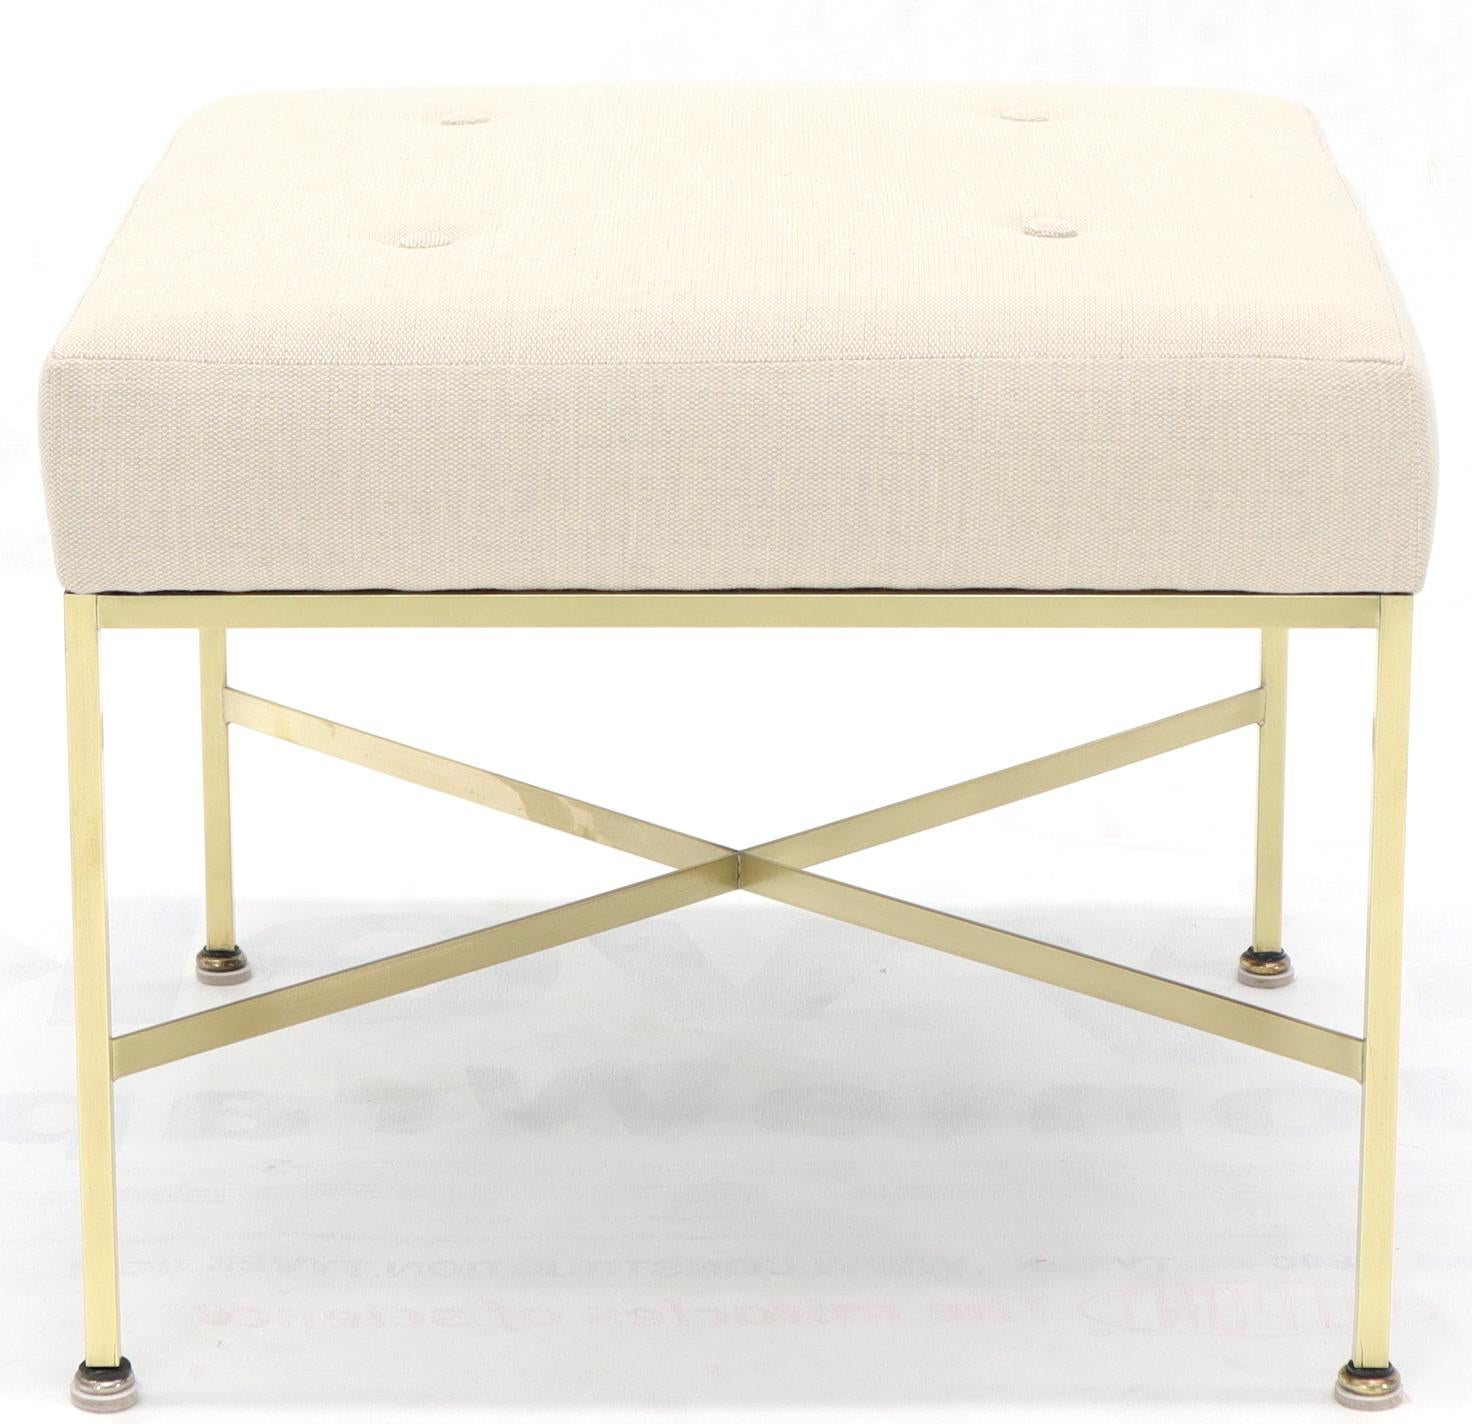 Pair of New Upholstery Square Brass Frames Benches Stools by Paul McCobb 1